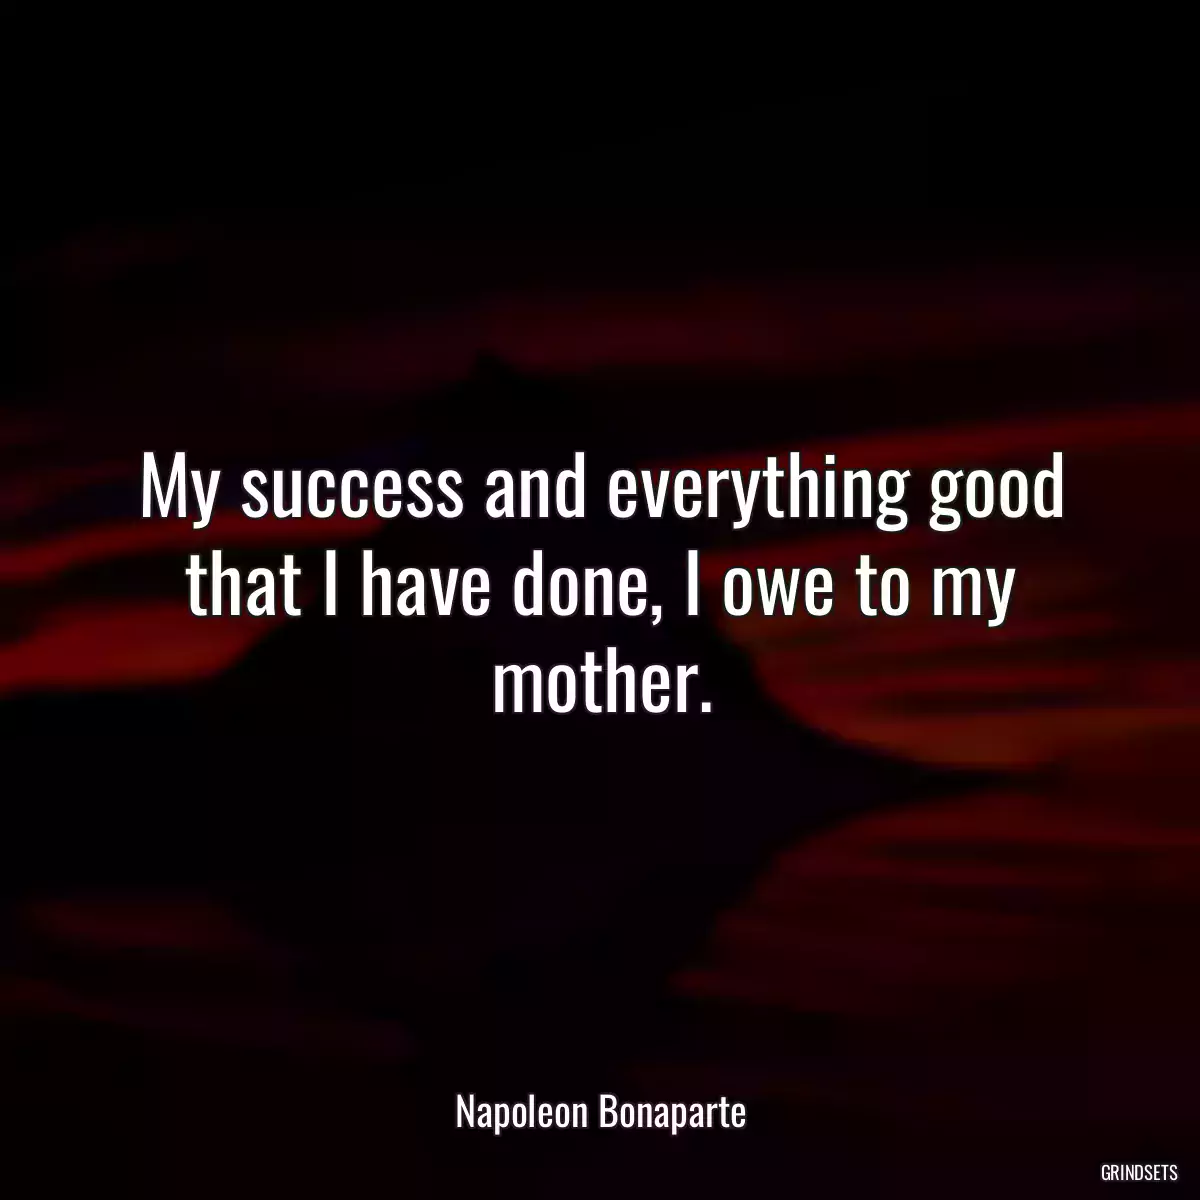 My success and everything good that I have done, I owe to my mother.